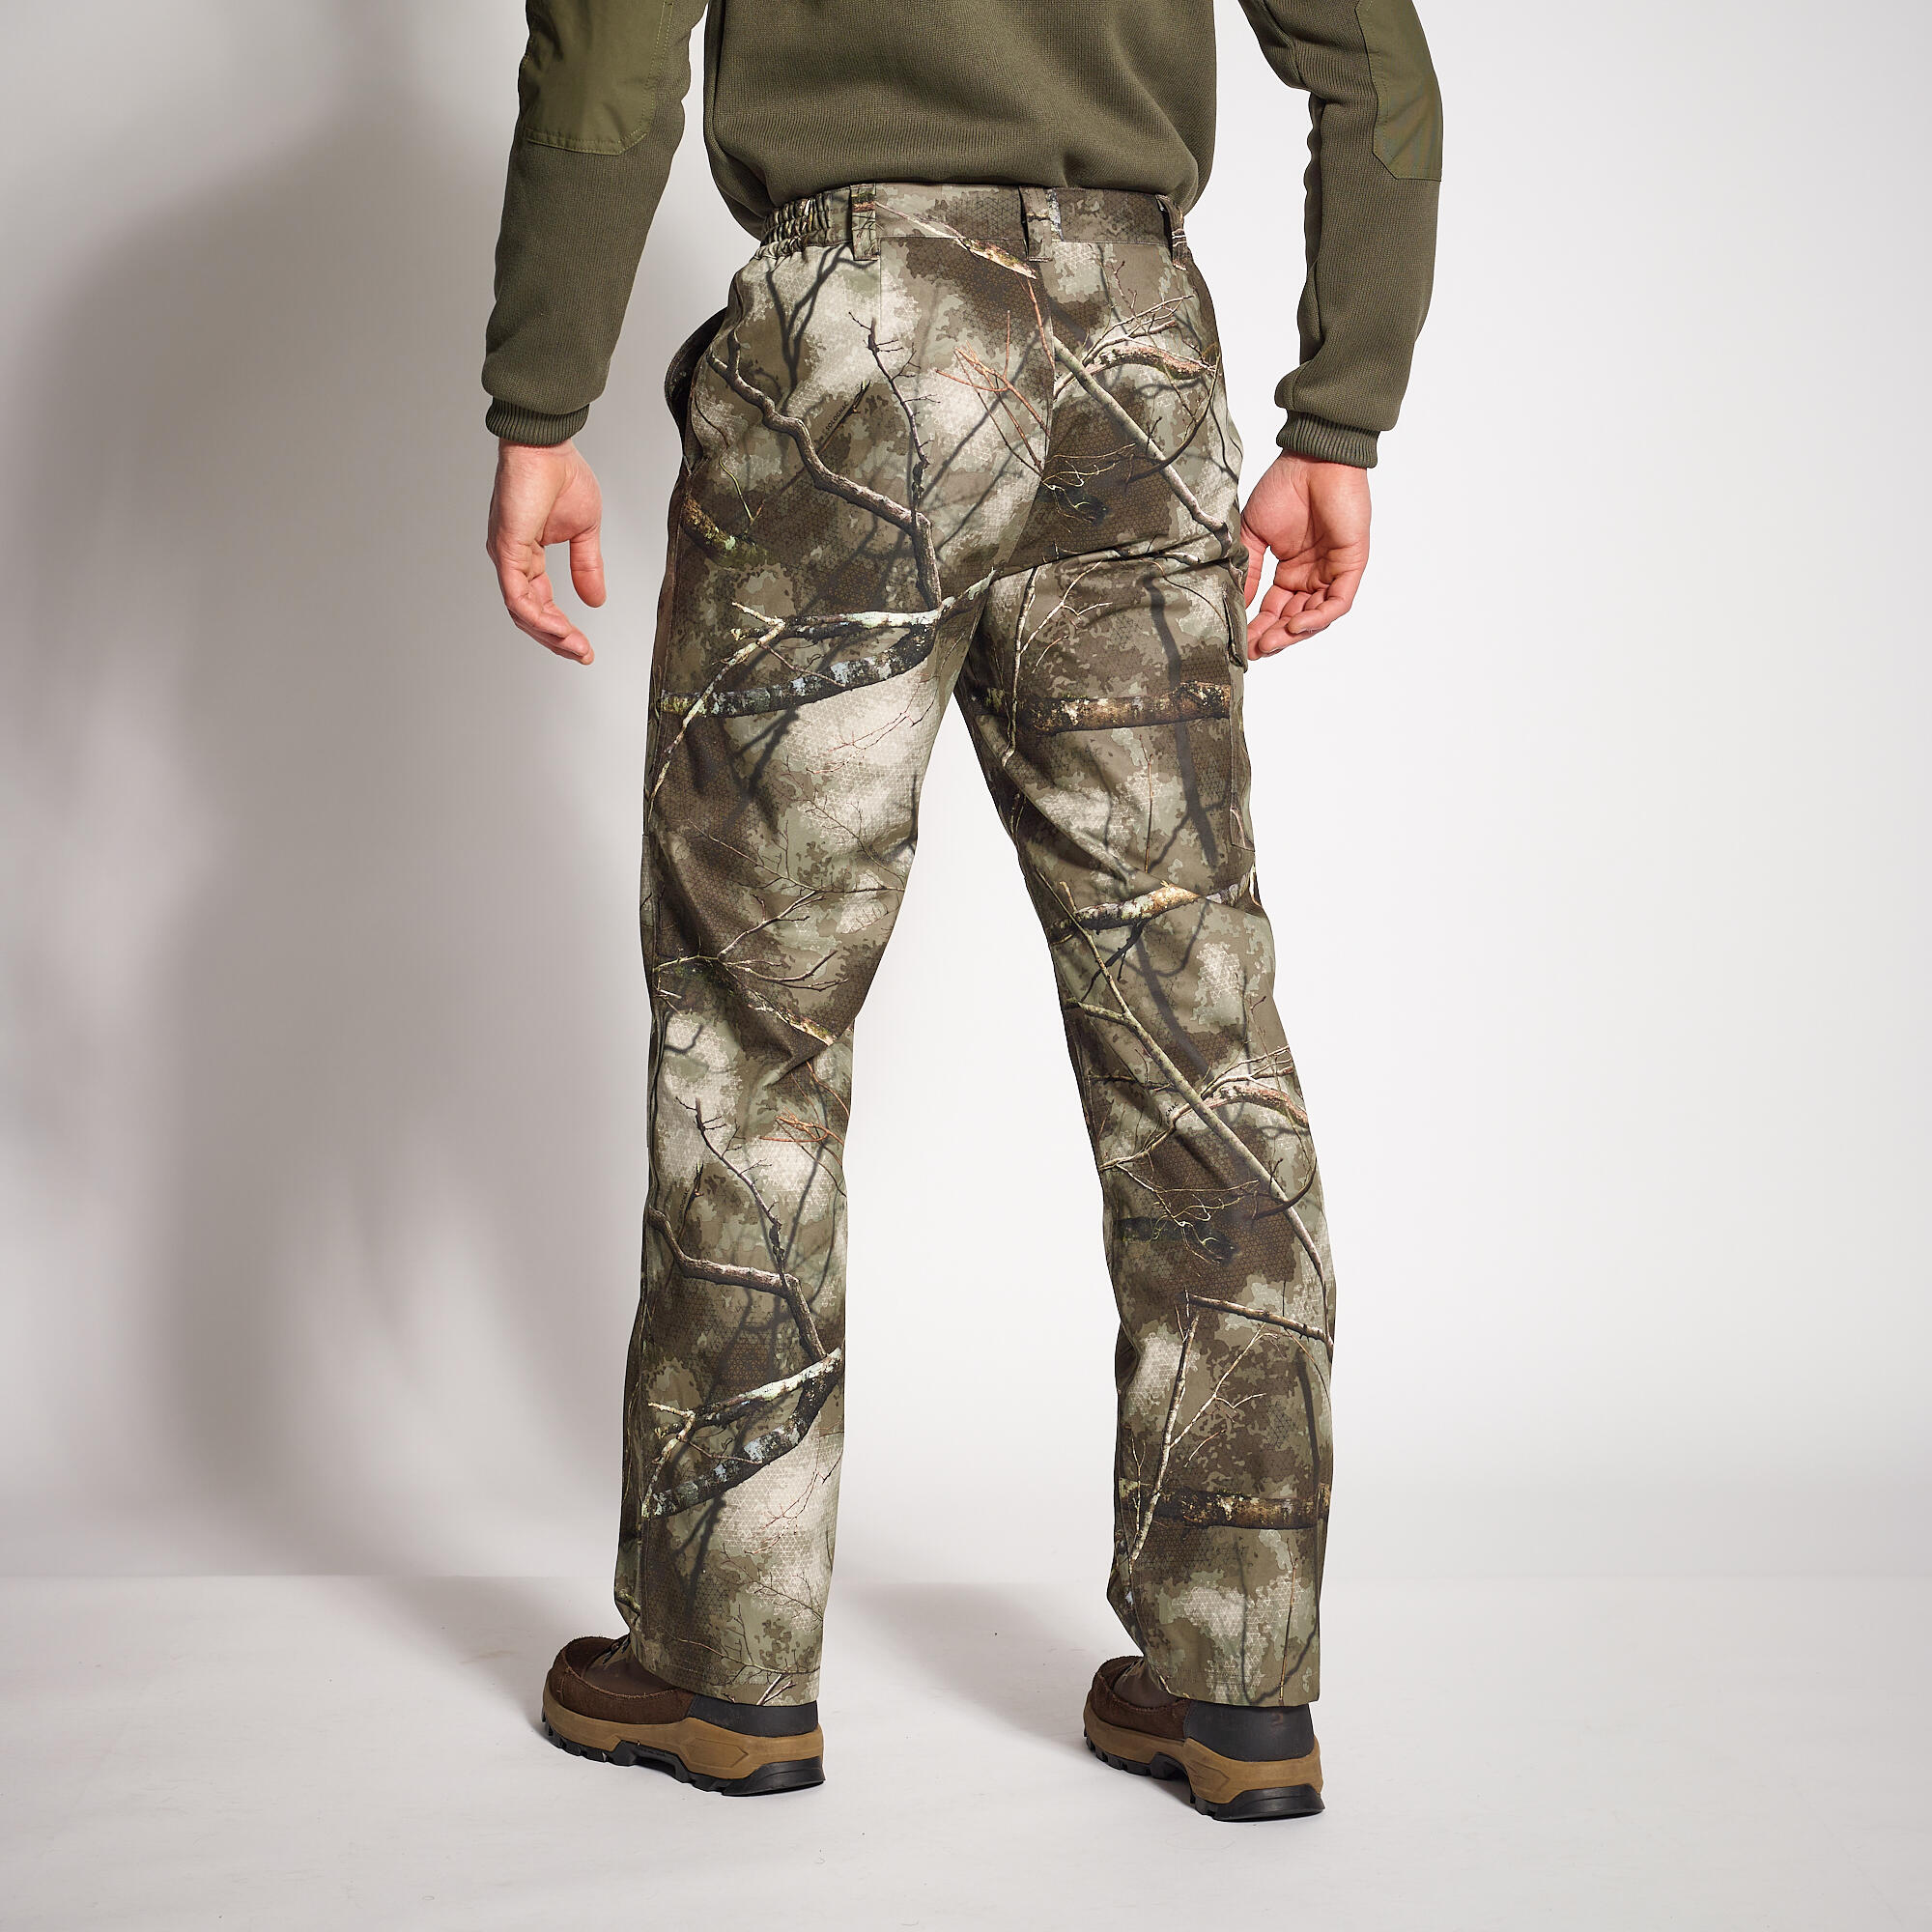 Northern Hunting - Hunting trousers for men in new and strong designs